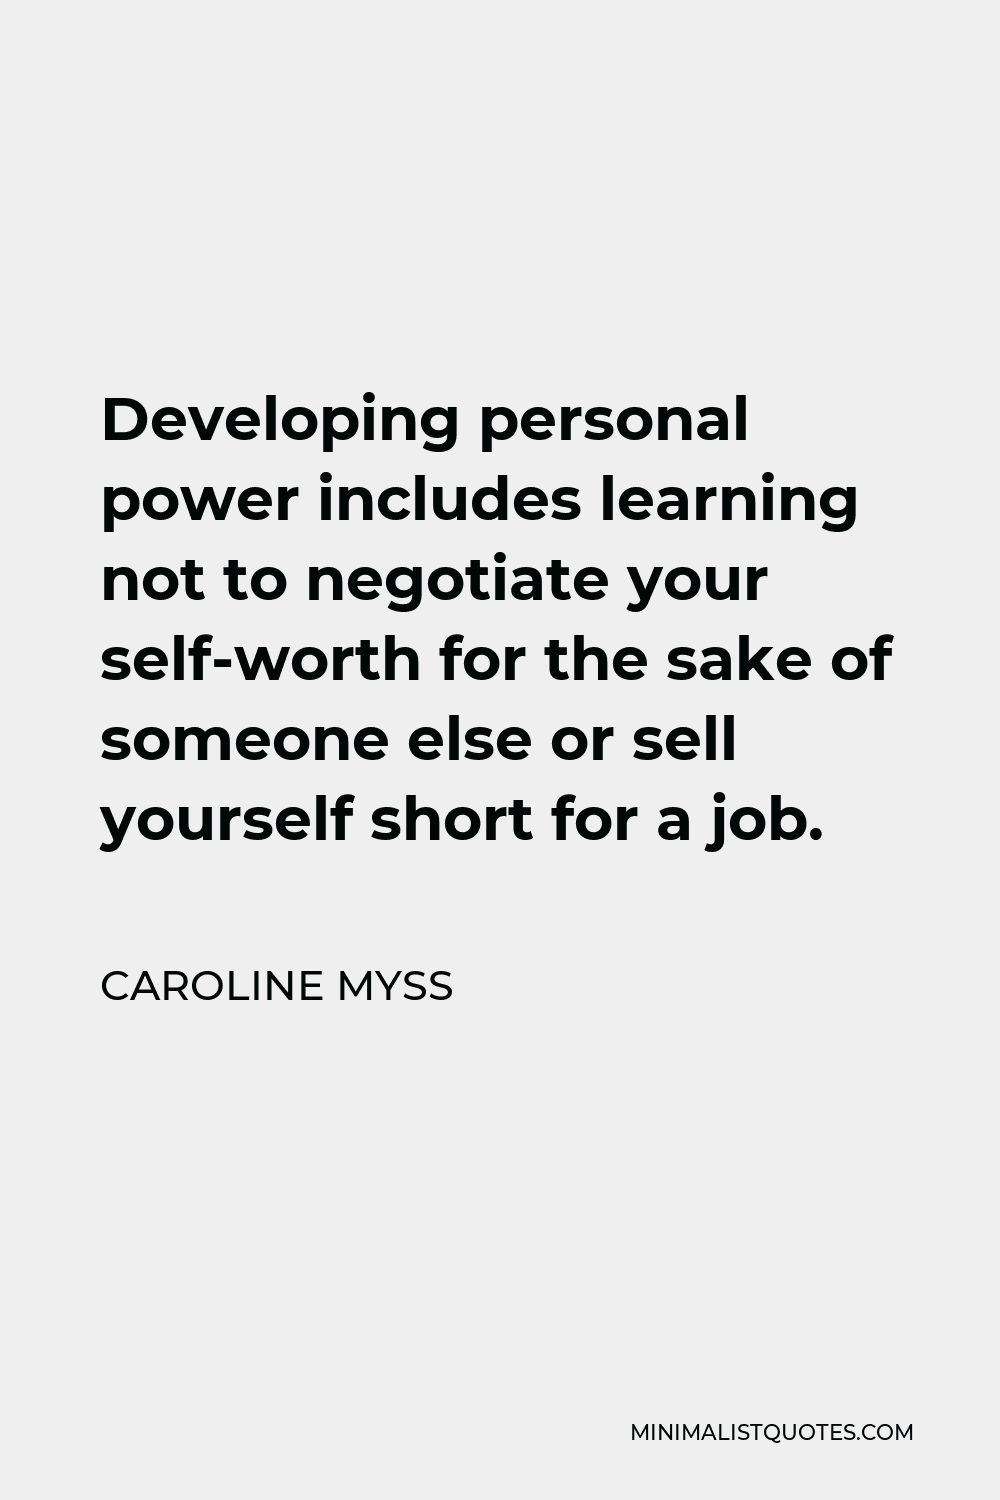 Caroline Myss Quote - Developing personal power includes learning not to negotiate your self-worth for the sake of someone else or sell yourself short for a job.